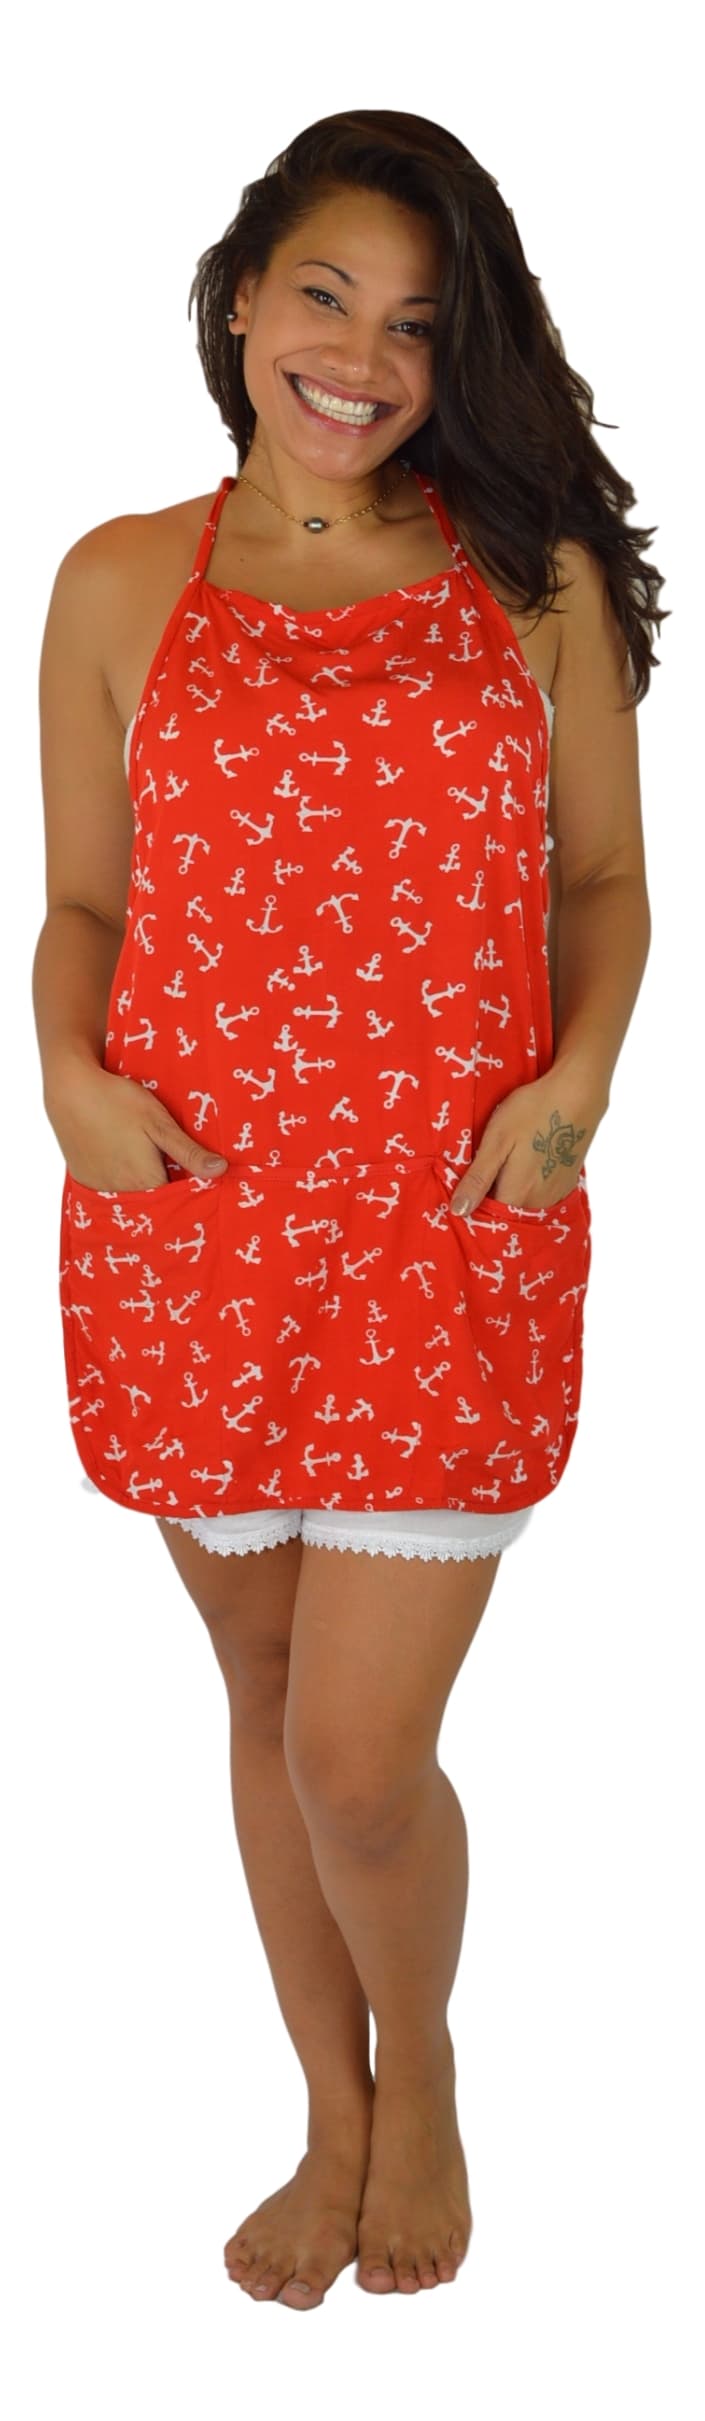 Galley World - Galley World Apron - Anchor - Red